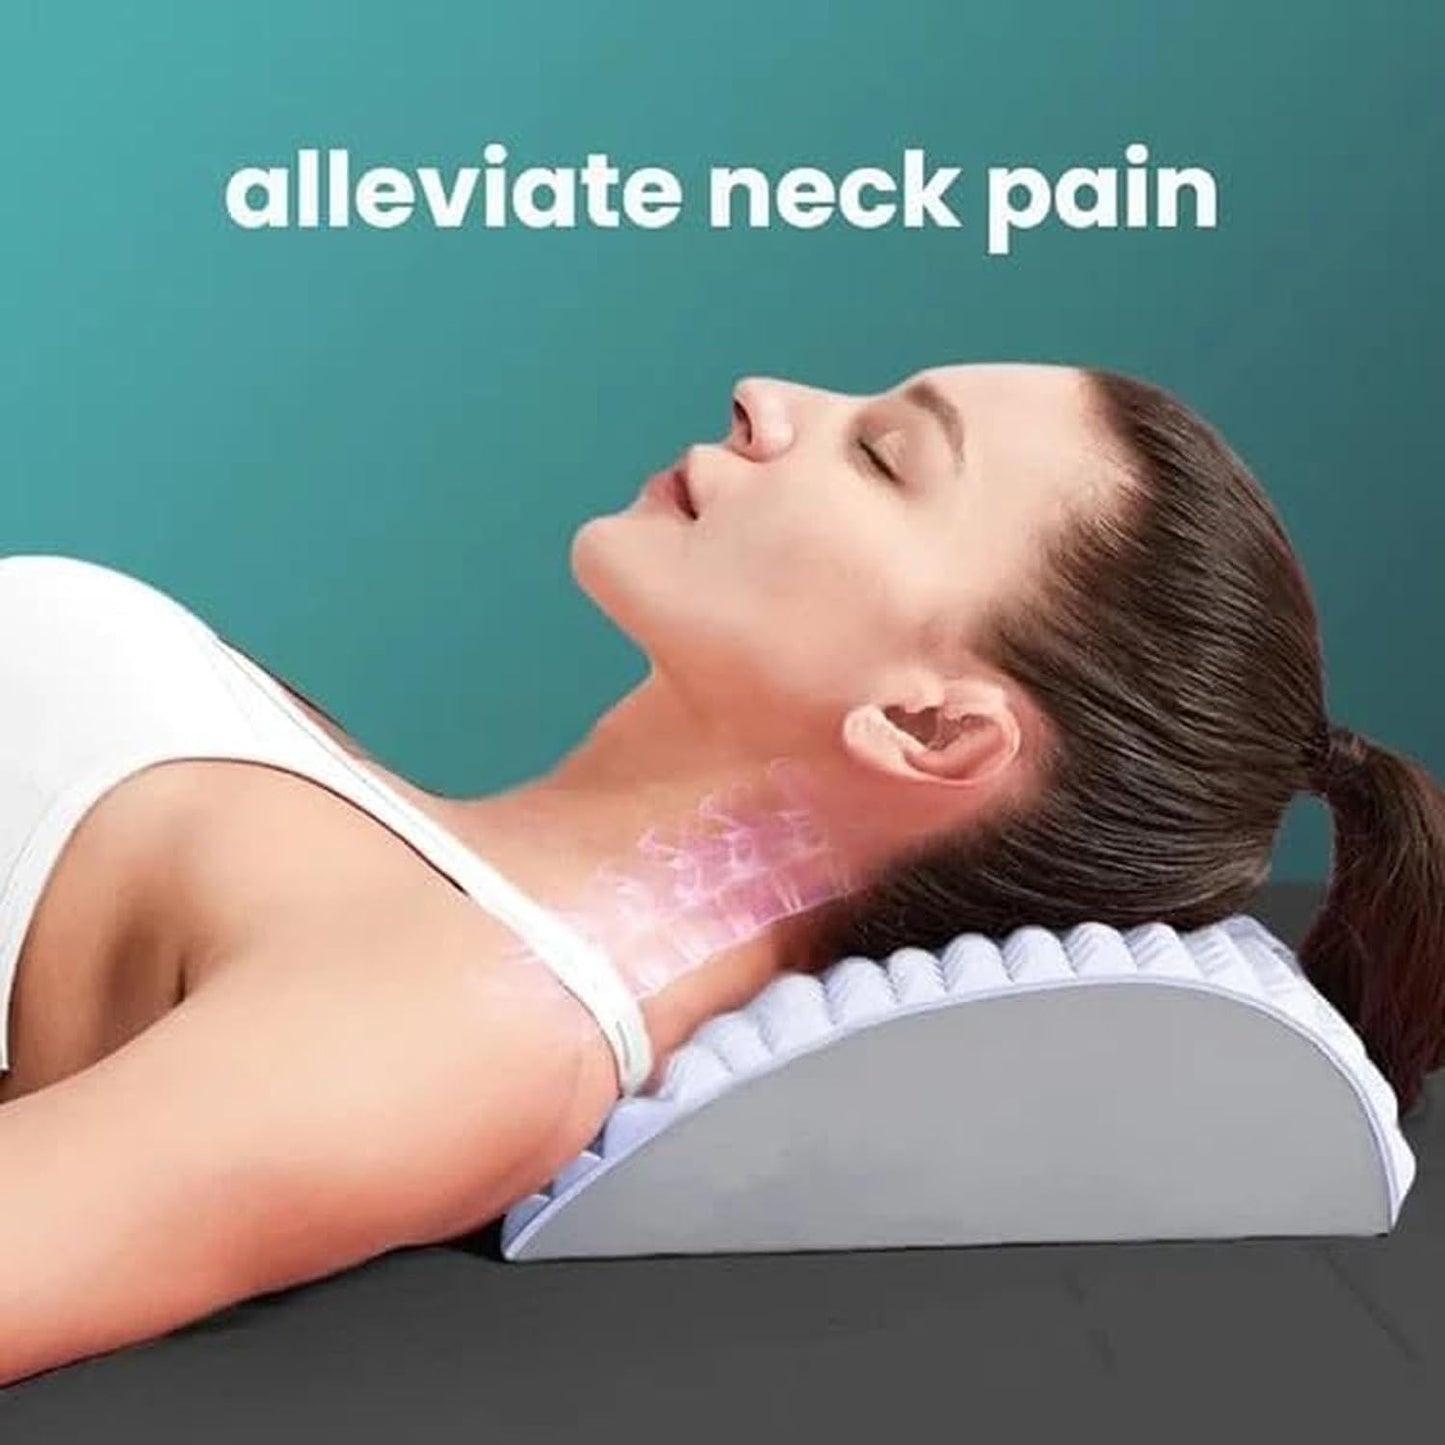 "Ultimate Back and Neck Relaxation Tool for Instant Pain Relief - Refresh and Rejuvenate with our Neck & Back Stretcher!"